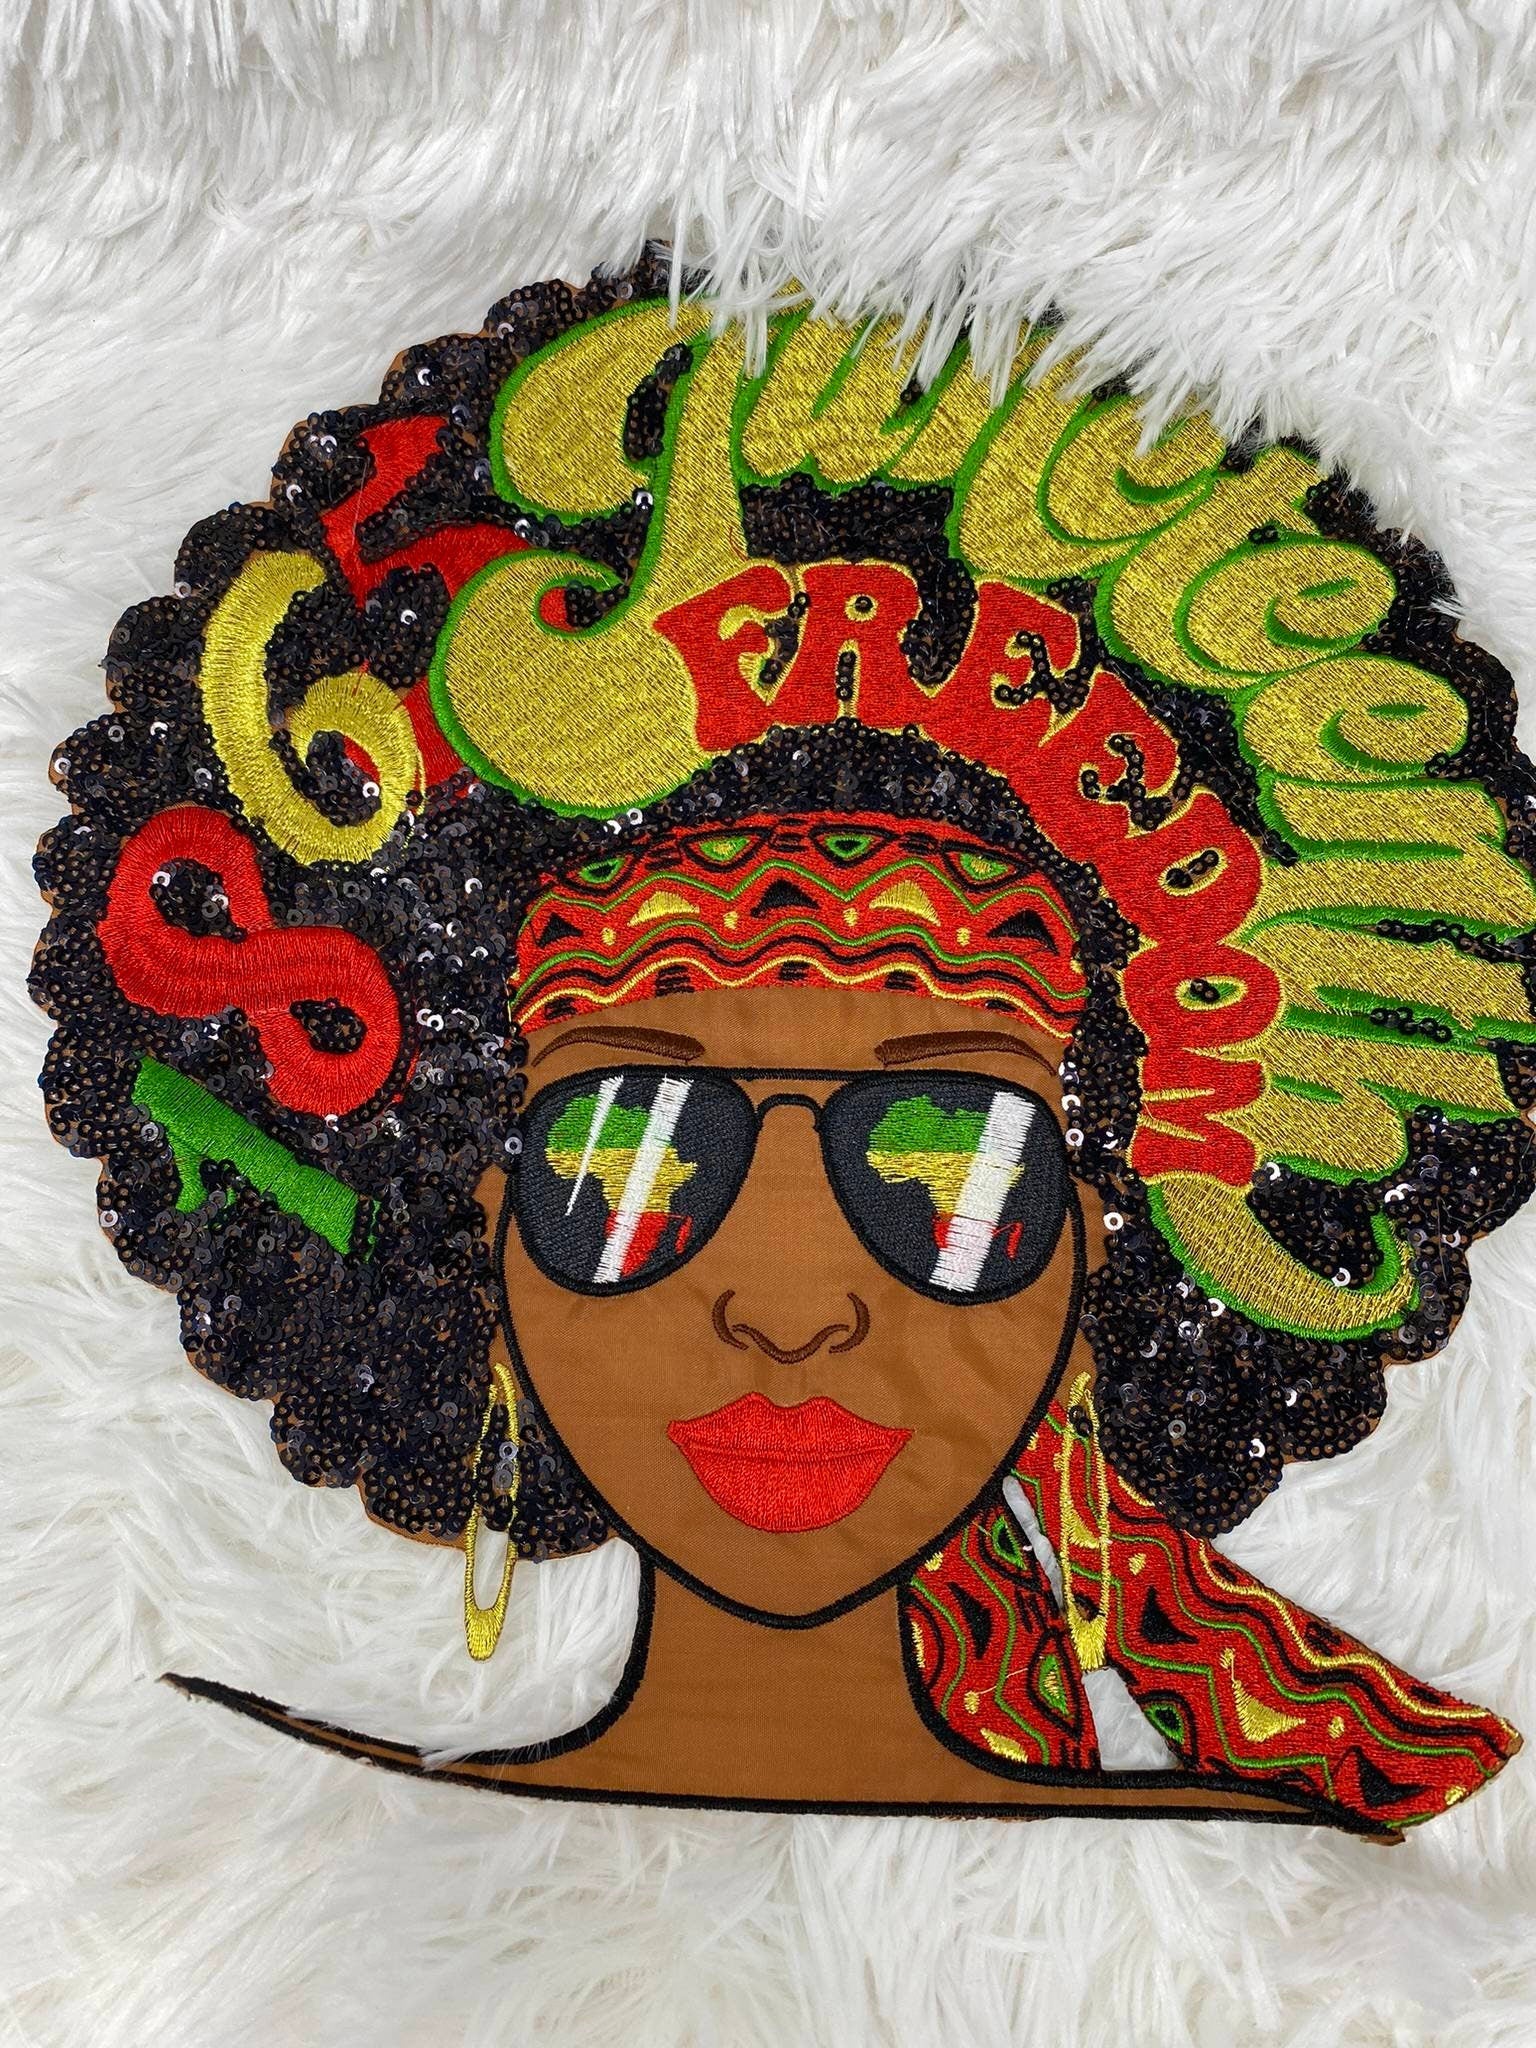 One-of-a-kind, 1865 Juneteenth 1-pc Iron-On "Afro Queen" Patch; Juneteenth Accessories for Clothing, Large Jacket Patch, Limited Edition